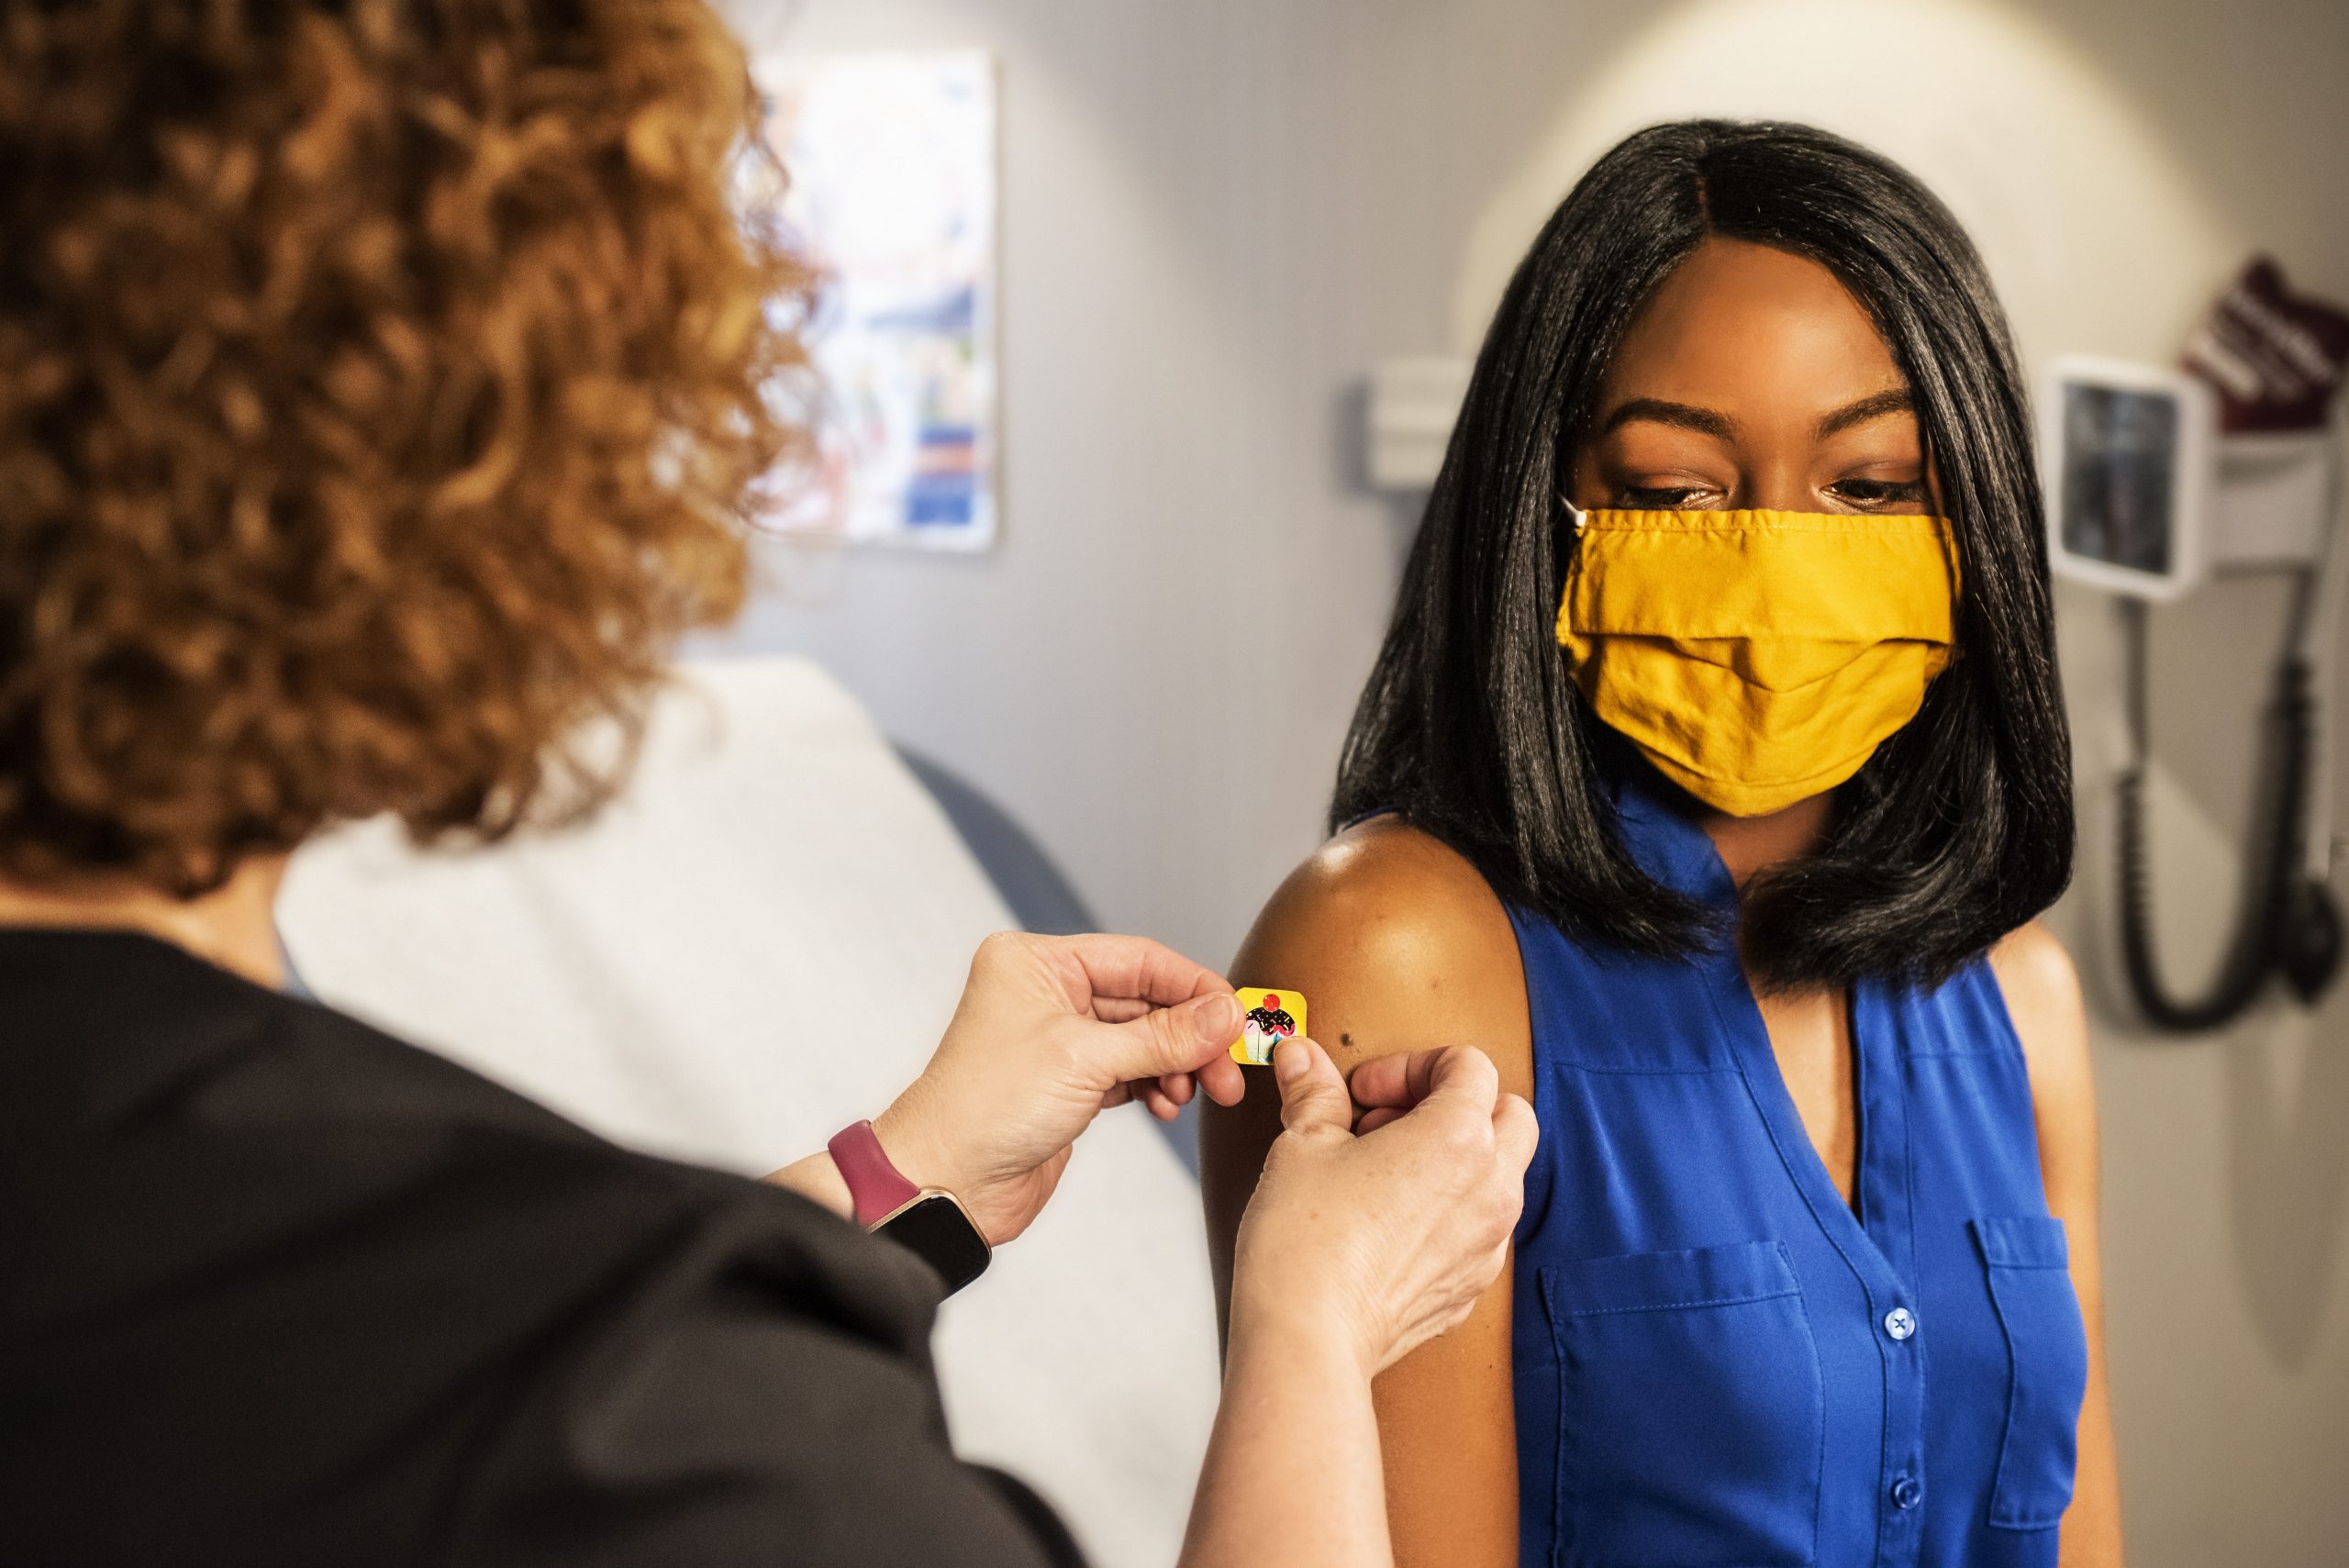 A black woman wearing a yellow face mask and blue top is given her covid vaccination by a person wearing a black top with curly hair. 